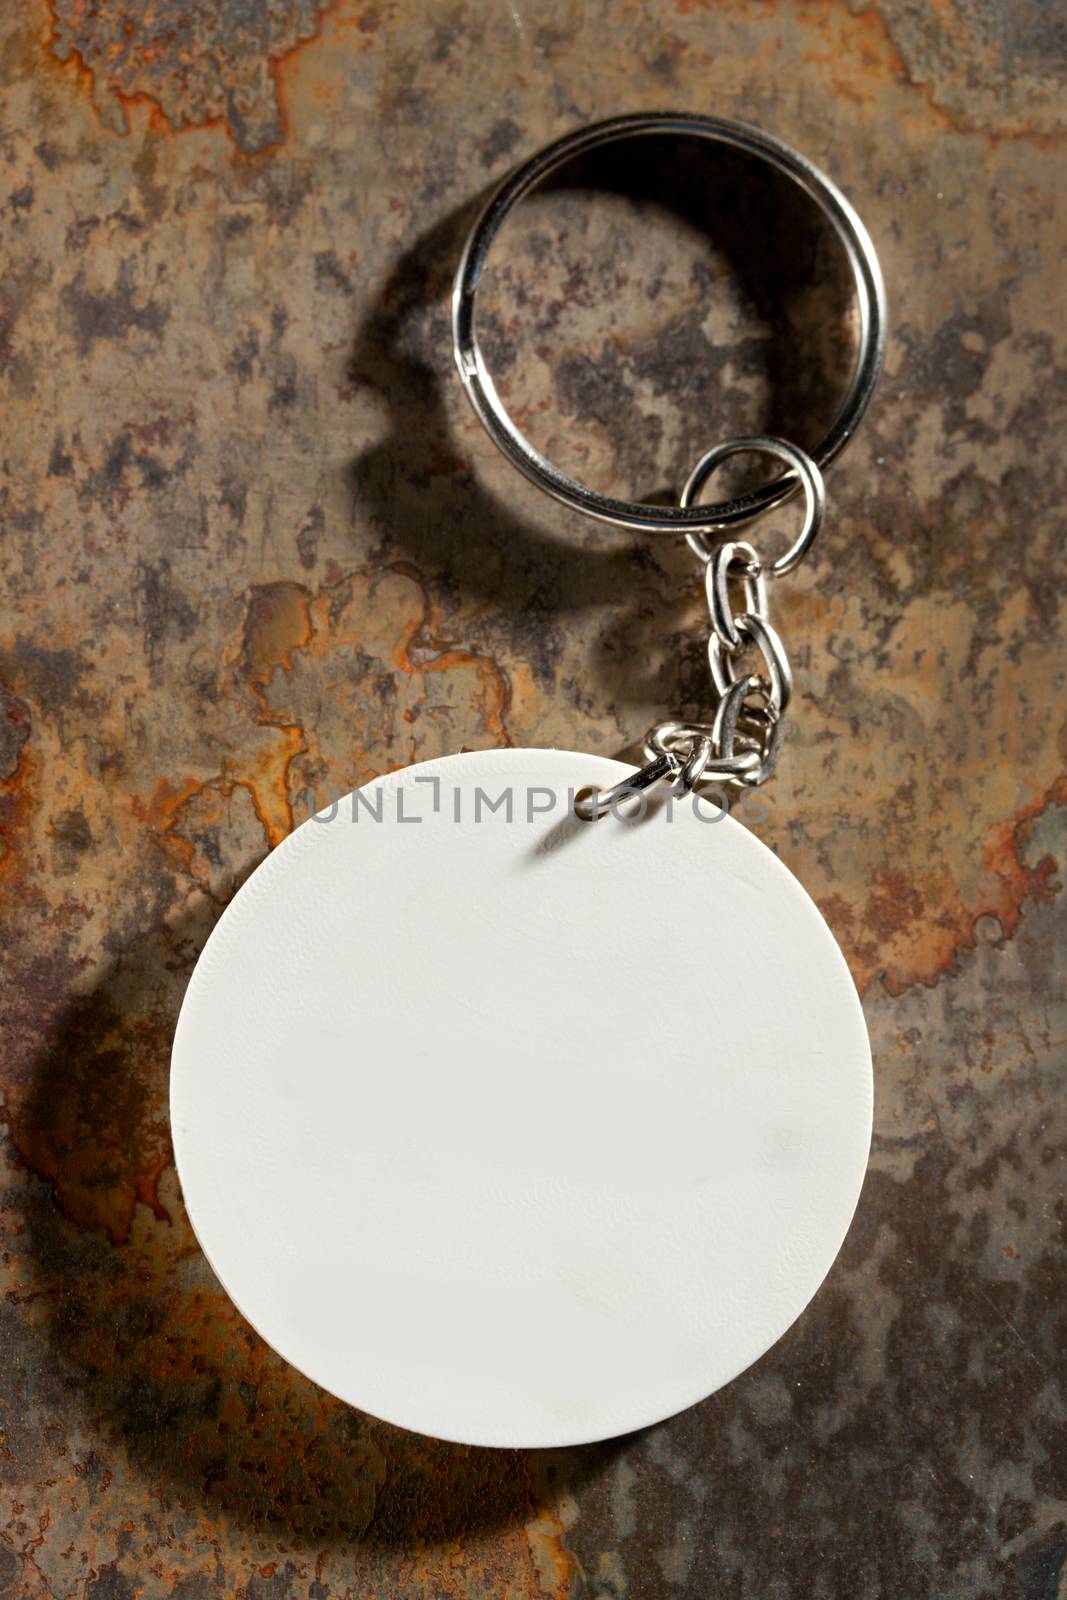 Key ring on the rusty background